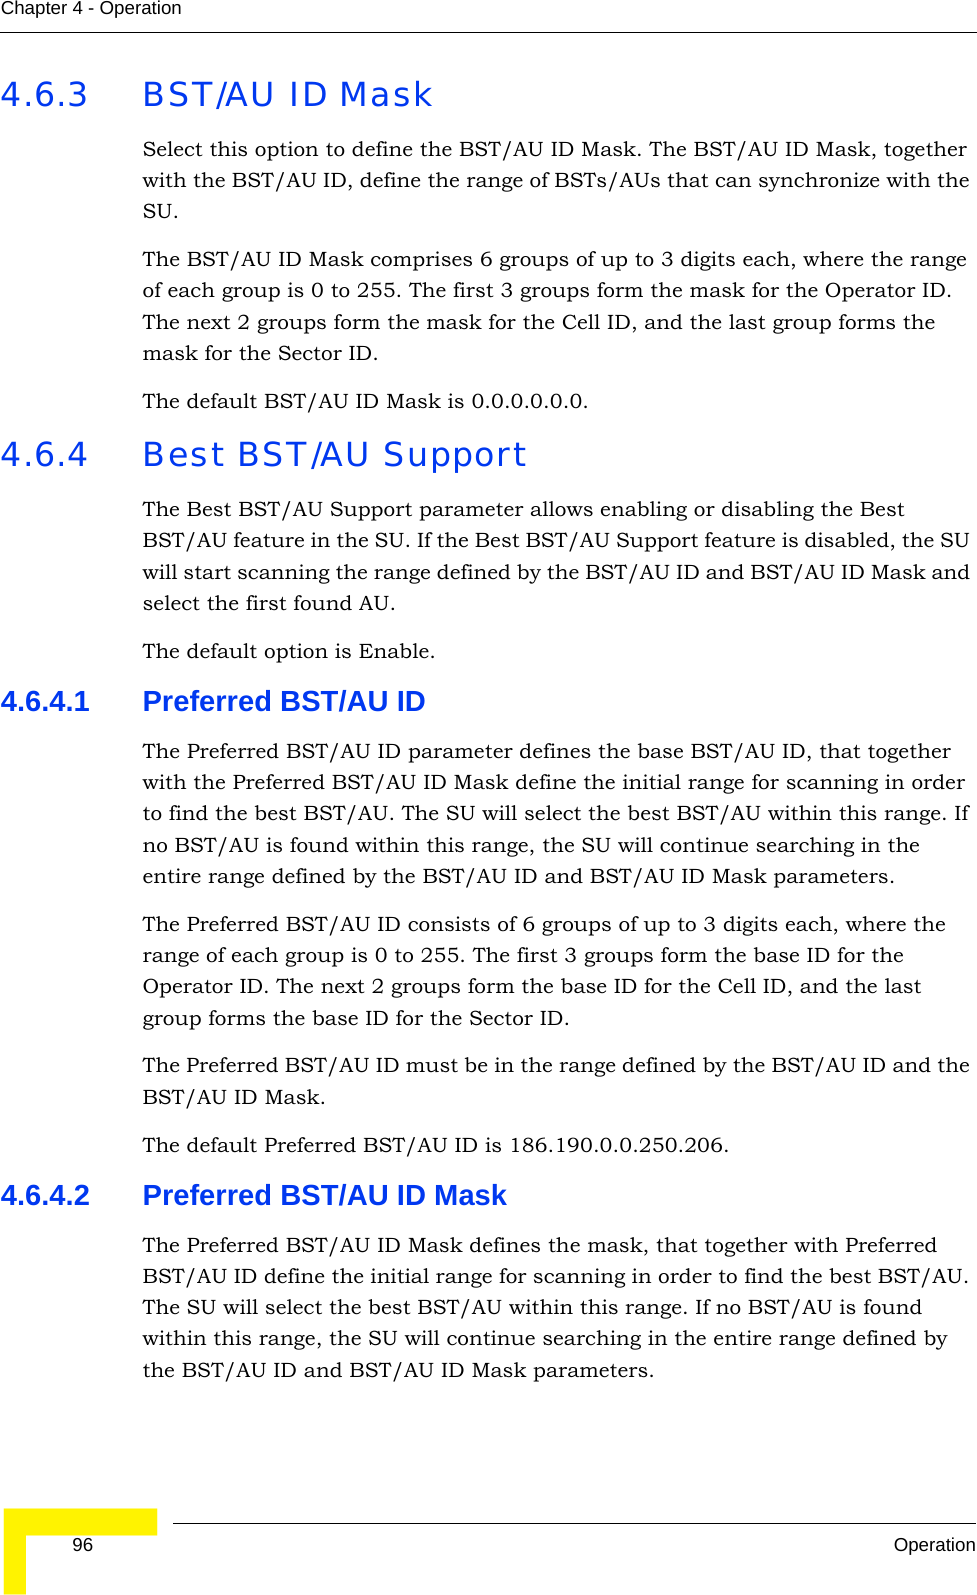  96 OperationChapter 4 - Operation4.6.3 BST/AU ID MaskSelect this option to define the BST/AU ID Mask. The BST/AU ID Mask, together with the BST/AU ID, define the range of BSTs/AUs that can synchronize with the SU.The BST/AU ID Mask comprises 6 groups of up to 3 digits each, where the range of each group is 0 to 255. The first 3 groups form the mask for the Operator ID. The next 2 groups form the mask for the Cell ID, and the last group forms the mask for the Sector ID.The default BST/AU ID Mask is 0.0.0.0.0.0.4.6.4 Best BST/AU SupportThe Best BST/AU Support parameter allows enabling or disabling the Best BST/AU feature in the SU. If the Best BST/AU Support feature is disabled, the SU will start scanning the range defined by the BST/AU ID and BST/AU ID Mask and select the first found AU.The default option is Enable.4.6.4.1 Preferred BST/AU IDThe Preferred BST/AU ID parameter defines the base BST/AU ID, that together with the Preferred BST/AU ID Mask define the initial range for scanning in order to find the best BST/AU. The SU will select the best BST/AU within this range. If no BST/AU is found within this range, the SU will continue searching in the entire range defined by the BST/AU ID and BST/AU ID Mask parameters.The Preferred BST/AU ID consists of 6 groups of up to 3 digits each, where the range of each group is 0 to 255. The first 3 groups form the base ID for the Operator ID. The next 2 groups form the base ID for the Cell ID, and the last group forms the base ID for the Sector ID.The Preferred BST/AU ID must be in the range defined by the BST/AU ID and the BST/AU ID Mask.The default Preferred BST/AU ID is 186.190.0.0.250.206.4.6.4.2 Preferred BST/AU ID MaskThe Preferred BST/AU ID Mask defines the mask, that together with Preferred BST/AU ID define the initial range for scanning in order to find the best BST/AU. The SU will select the best BST/AU within this range. If no BST/AU is found within this range, the SU will continue searching in the entire range defined by the BST/AU ID and BST/AU ID Mask parameters.